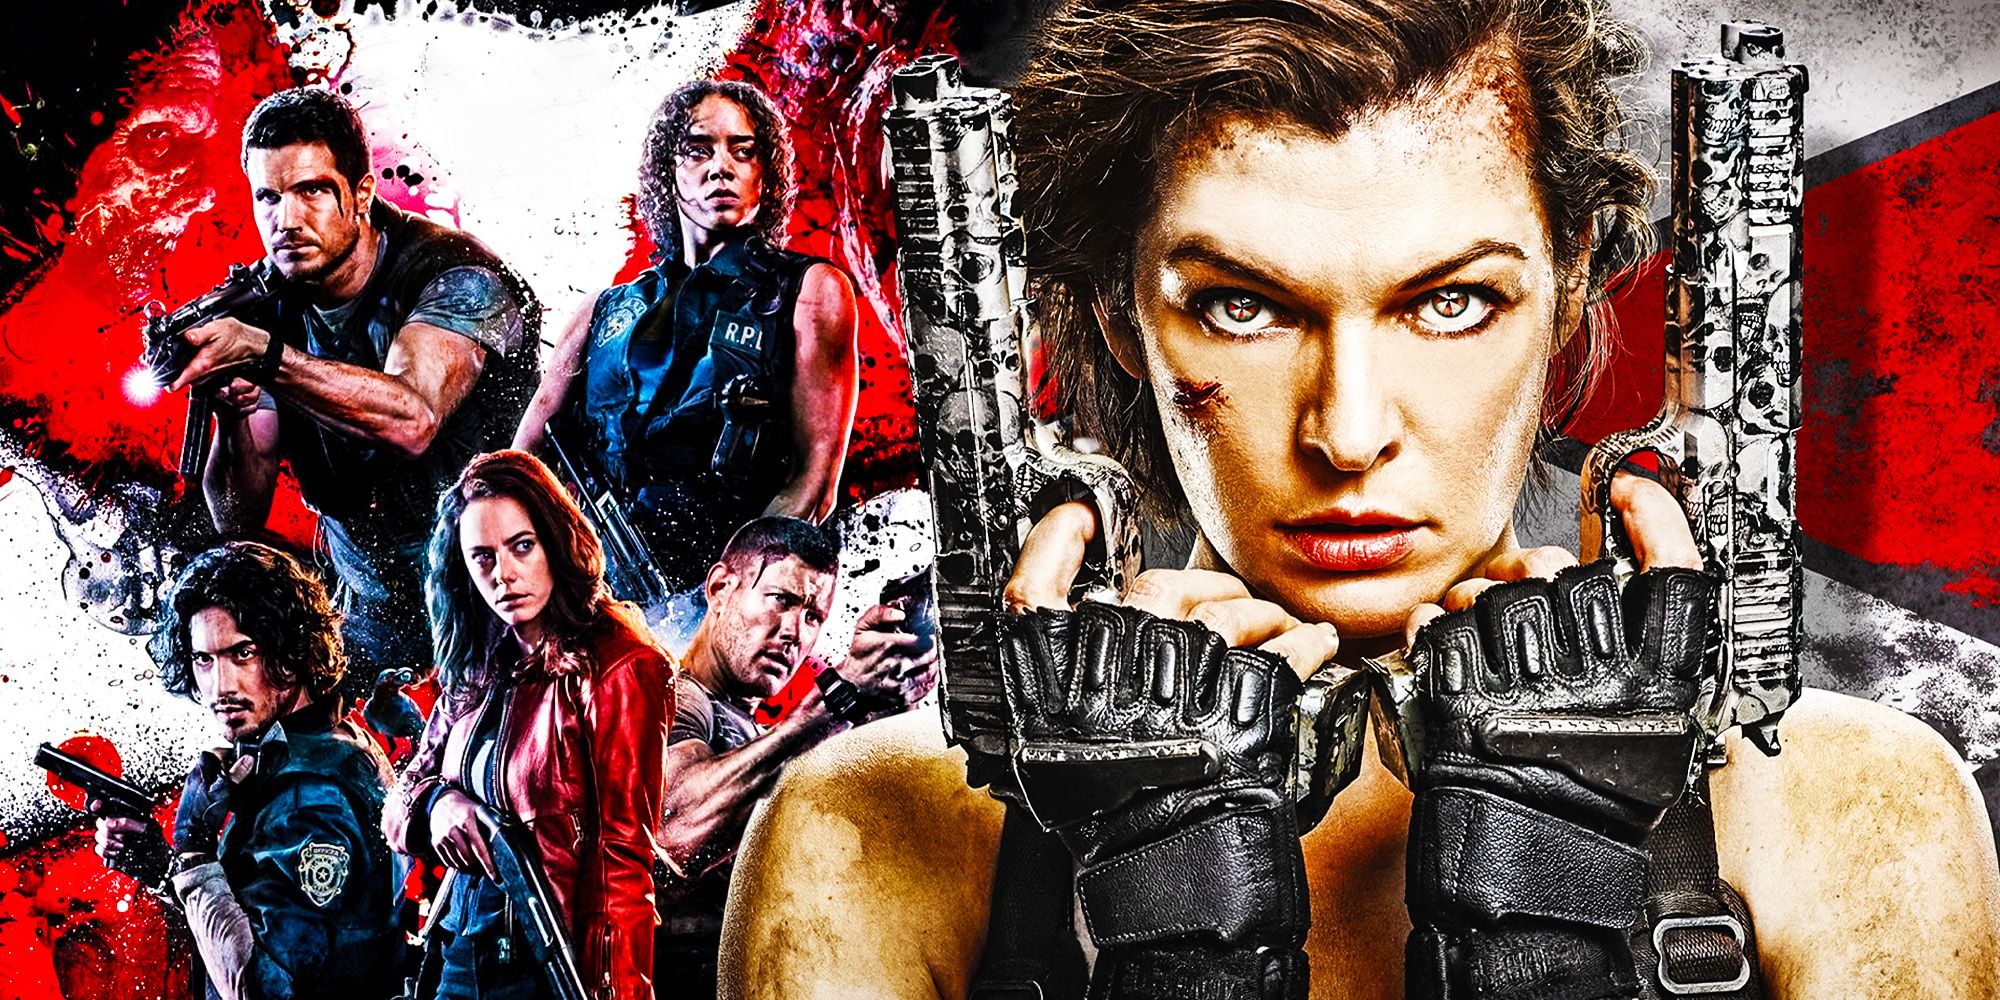 New Trailer For Resident Evil: The Final Chapter Released